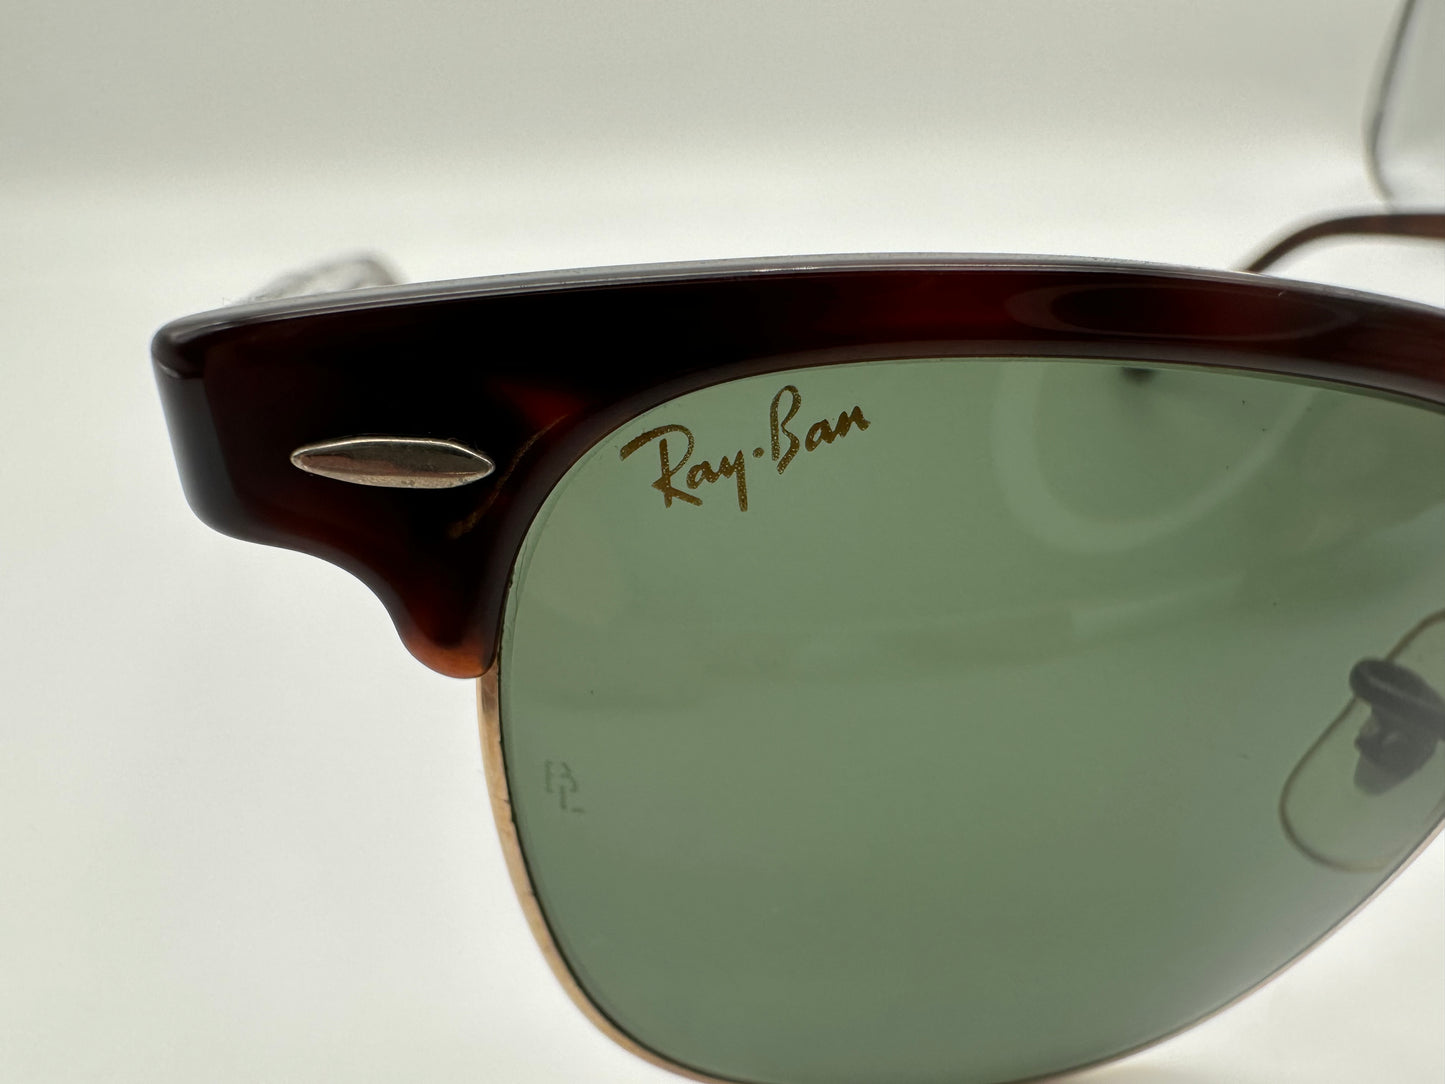 RAY-BAN USA BAUSCH & LOMB Clubmaster 51mm W0366 new old stock